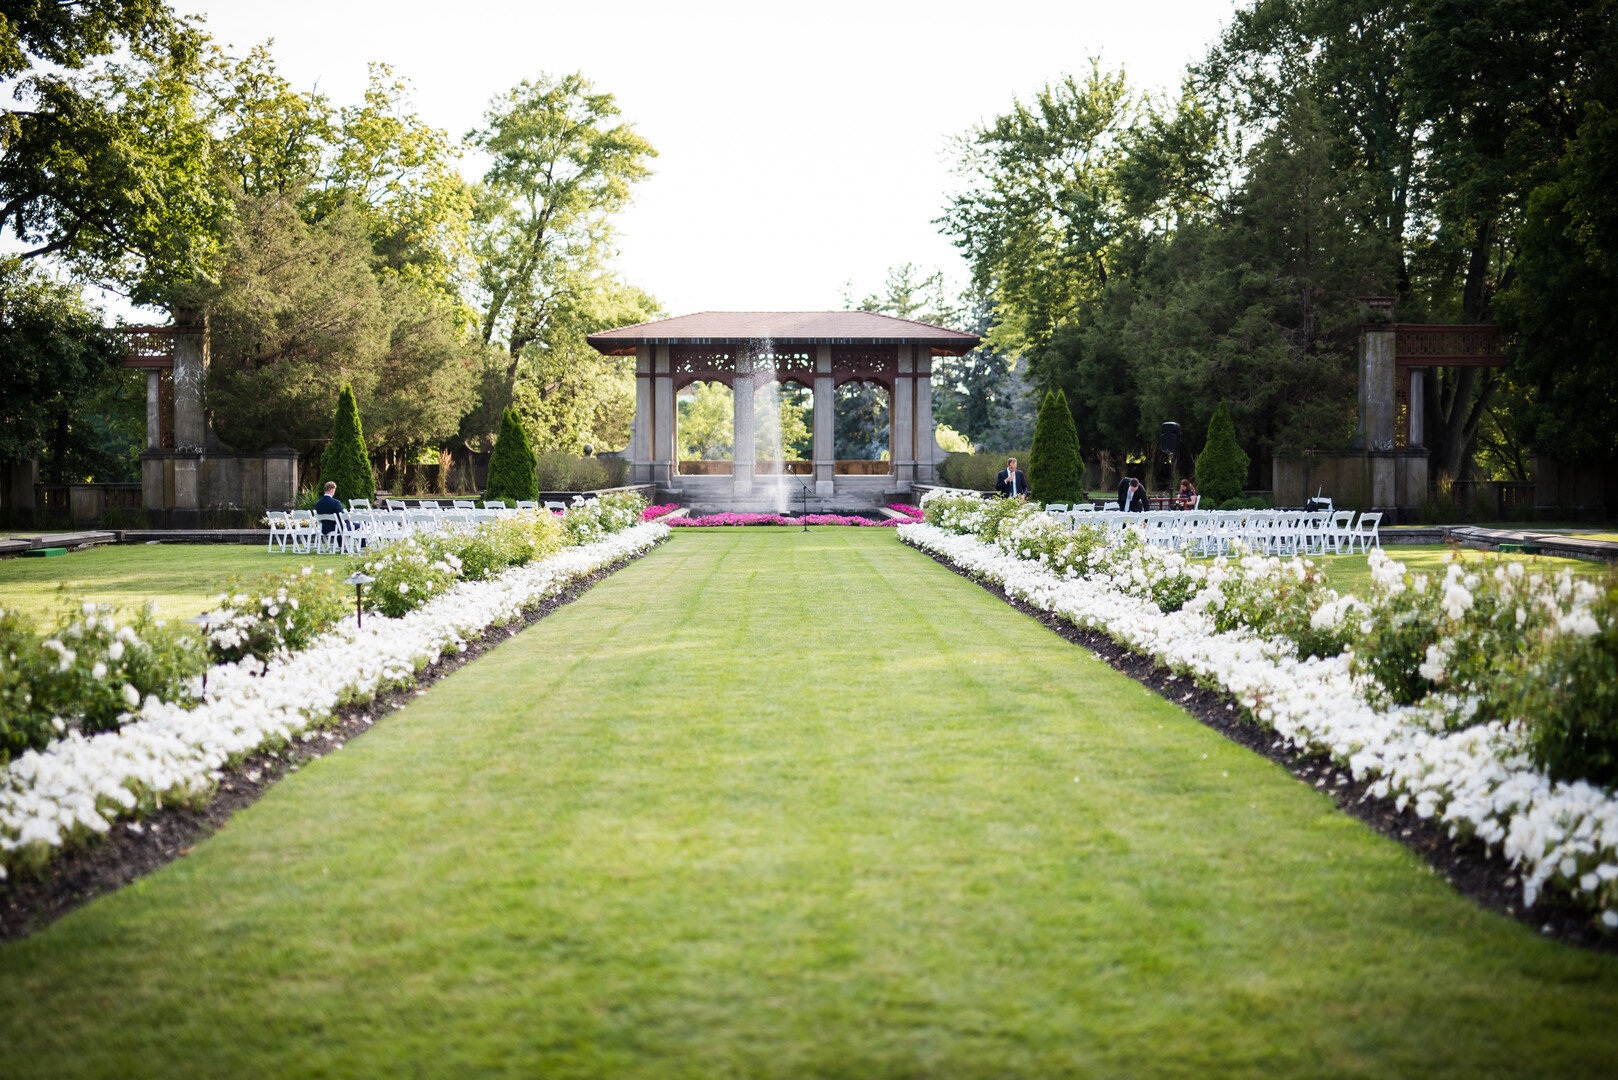 Outdoor wedding ceremony: Golden Hour Armour House Chicago Wedding captured by Inspired Eye Photography featured on CHI thee WED. Find more wedding ideas at CHItheeWED.com!